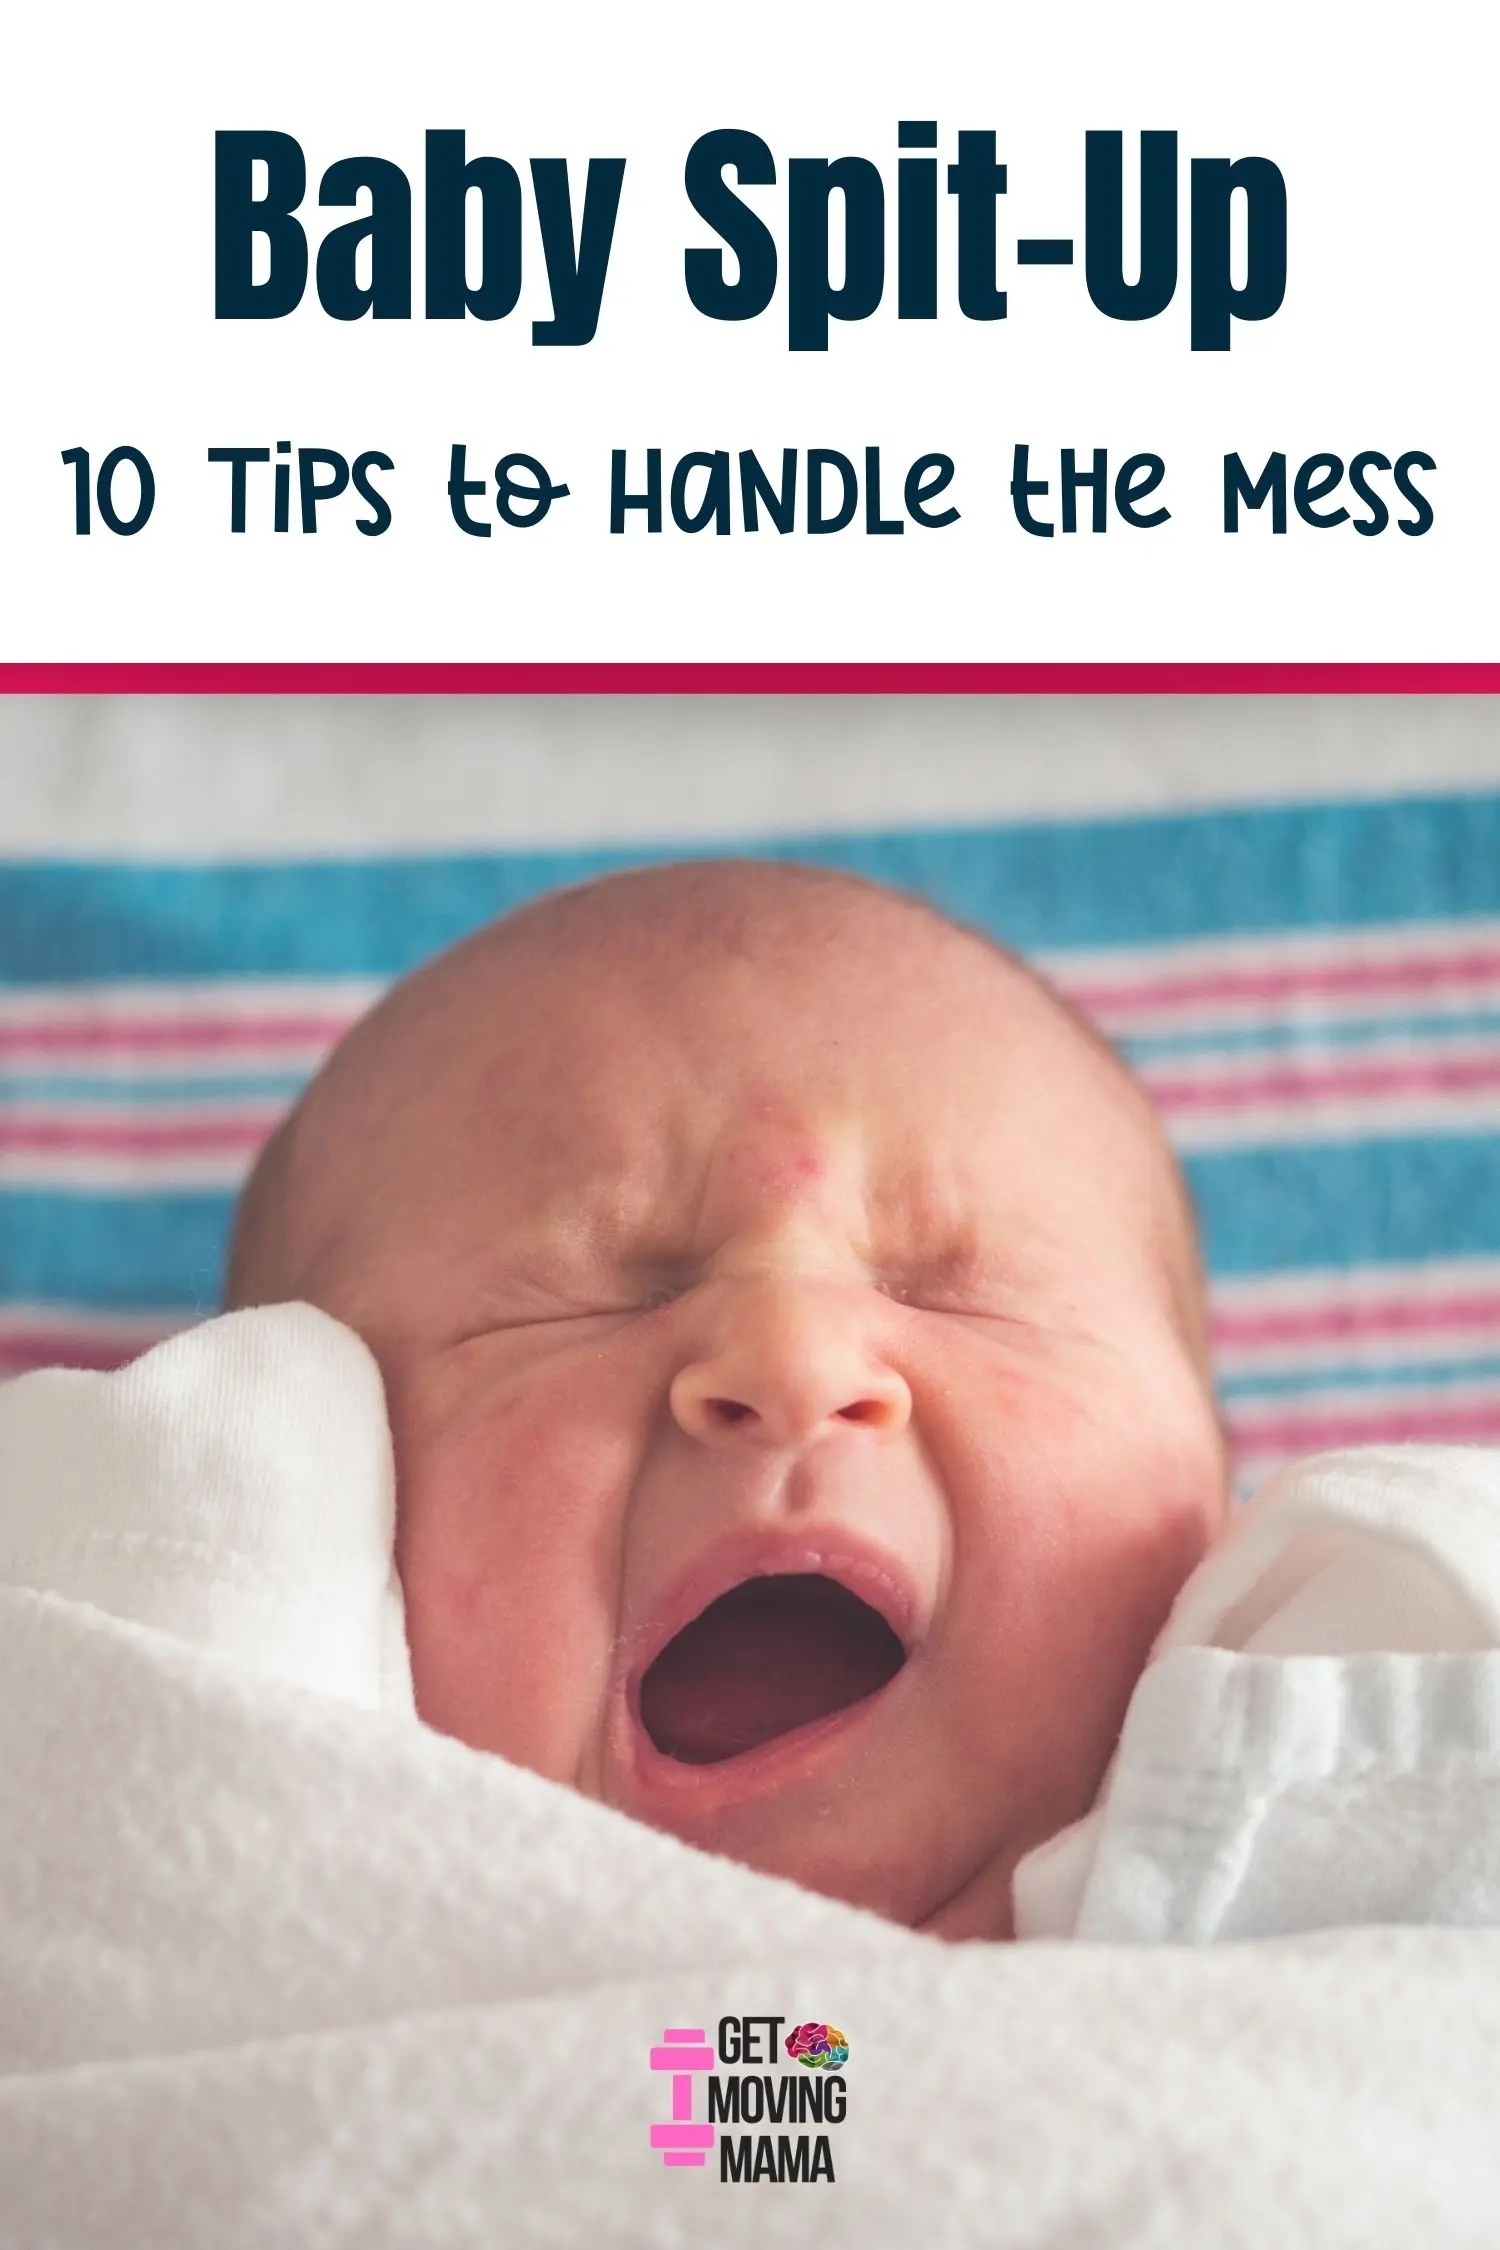 A picture of a newborn baby crying with "baby spit-up 10 tips for handling the mess" in dark blue text over a white rectangle.